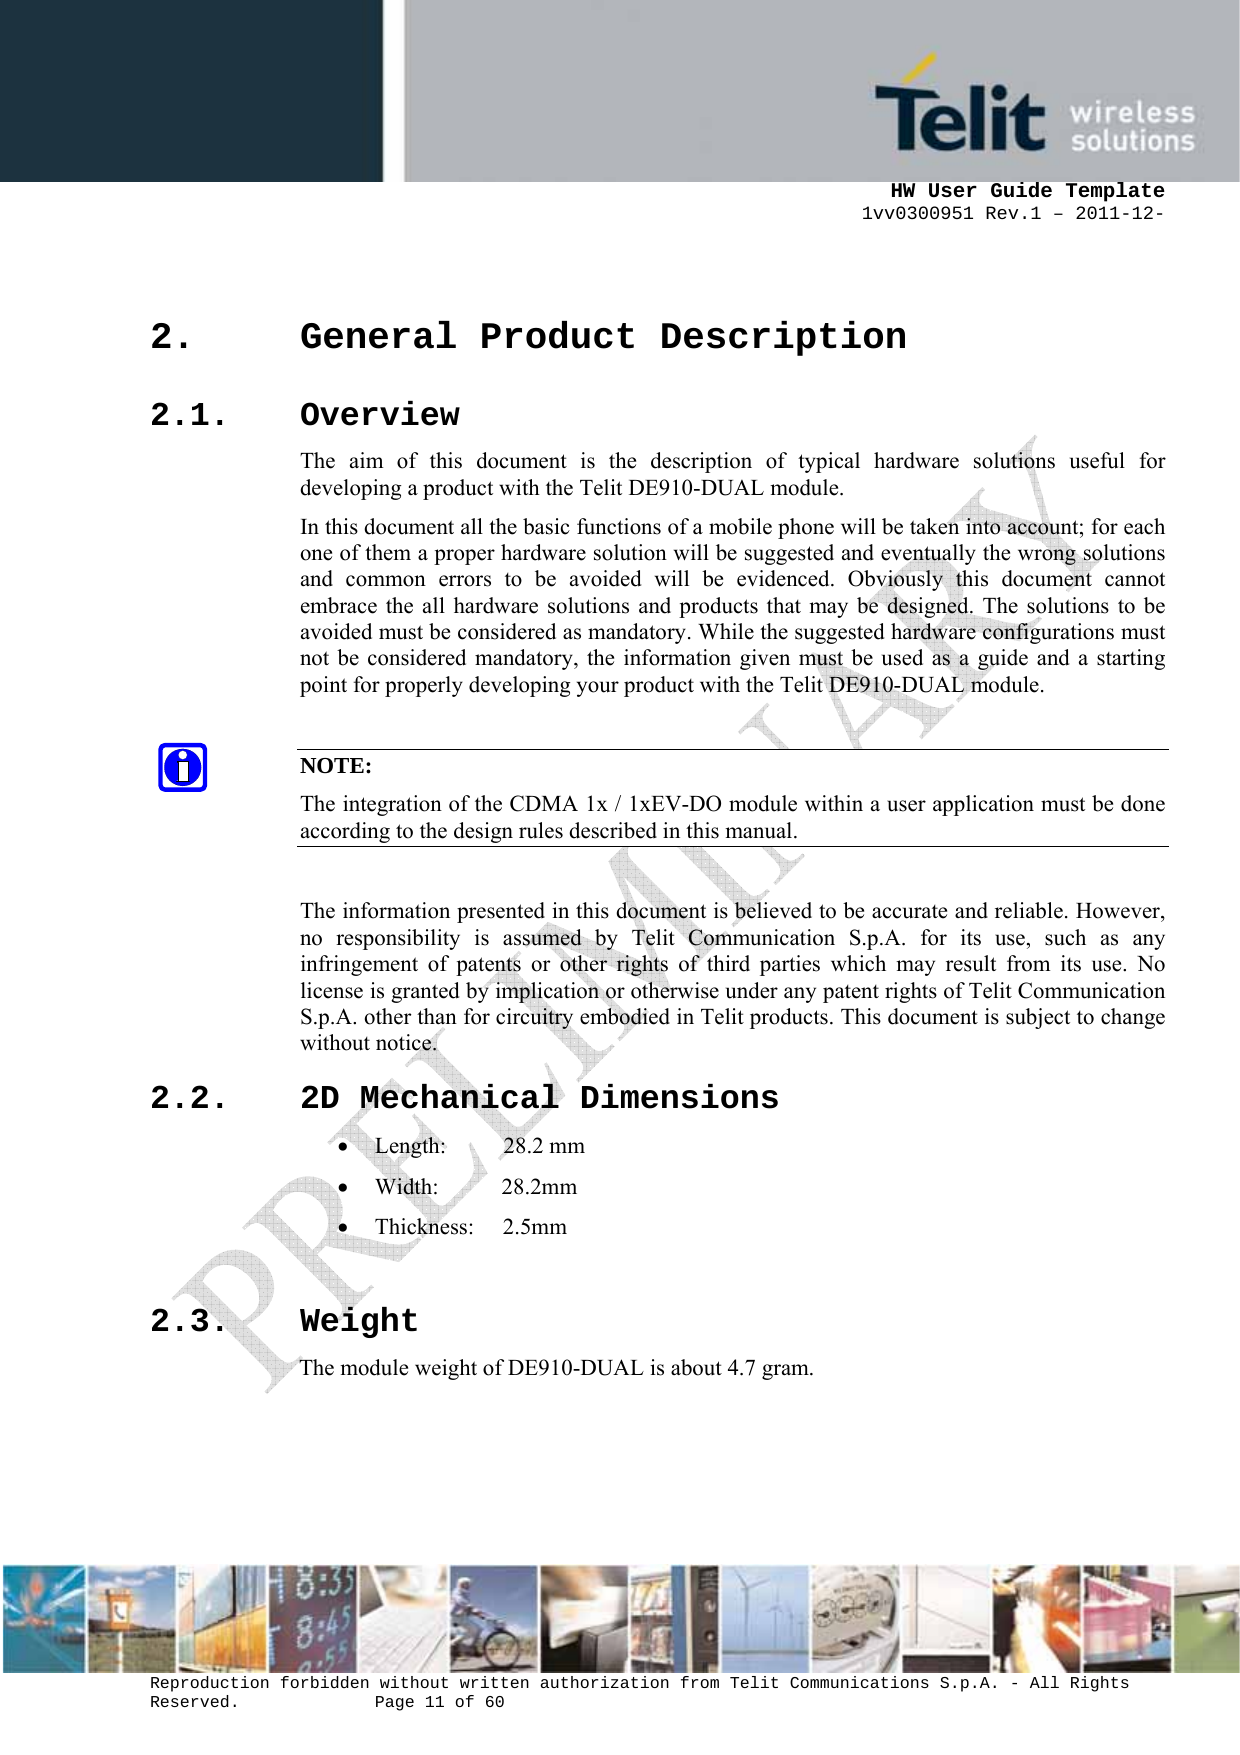      HW User Guide Template 1vv0300951 Rev.1 – 2011-12-  Reproduction forbidden without written authorization from Telit Communications S.p.A. - All Rights Reserved.    Page 11 of 60                                                     2. General Product Description 2.1. Overview The aim of this document is the description of typical hardware solutions useful for developing a product with the Telit DE910-DUAL module. In this document all the basic functions of a mobile phone will be taken into account; for each one of them a proper hardware solution will be suggested and eventually the wrong solutions and common errors to be avoided will be evidenced. Obviously this document cannot embrace the all hardware solutions and products that may be designed. The solutions to be avoided must be considered as mandatory. While the suggested hardware configurations must not be considered mandatory, the information given must be used as a guide and a starting point for properly developing your product with the Telit DE910-DUAL module.  NOTE: The integration of the CDMA 1x / 1xEV-DO module within a user application must be done according to the design rules described in this manual.  The information presented in this document is believed to be accurate and reliable. However, no responsibility is assumed by Telit Communication S.p.A. for its use, such as any infringement of patents or other rights of third parties which may result from its use. No license is granted by implication or otherwise under any patent rights of Telit Communication S.p.A. other than for circuitry embodied in Telit products. This document is subject to change without notice. 2.2. 2D Mechanical Dimensions • Length:          28.2 mm • Width:           28.2mm • Thickness:     2.5mm  2.3. Weight The module weight of DE910-DUAL is about 4.7 gram.    